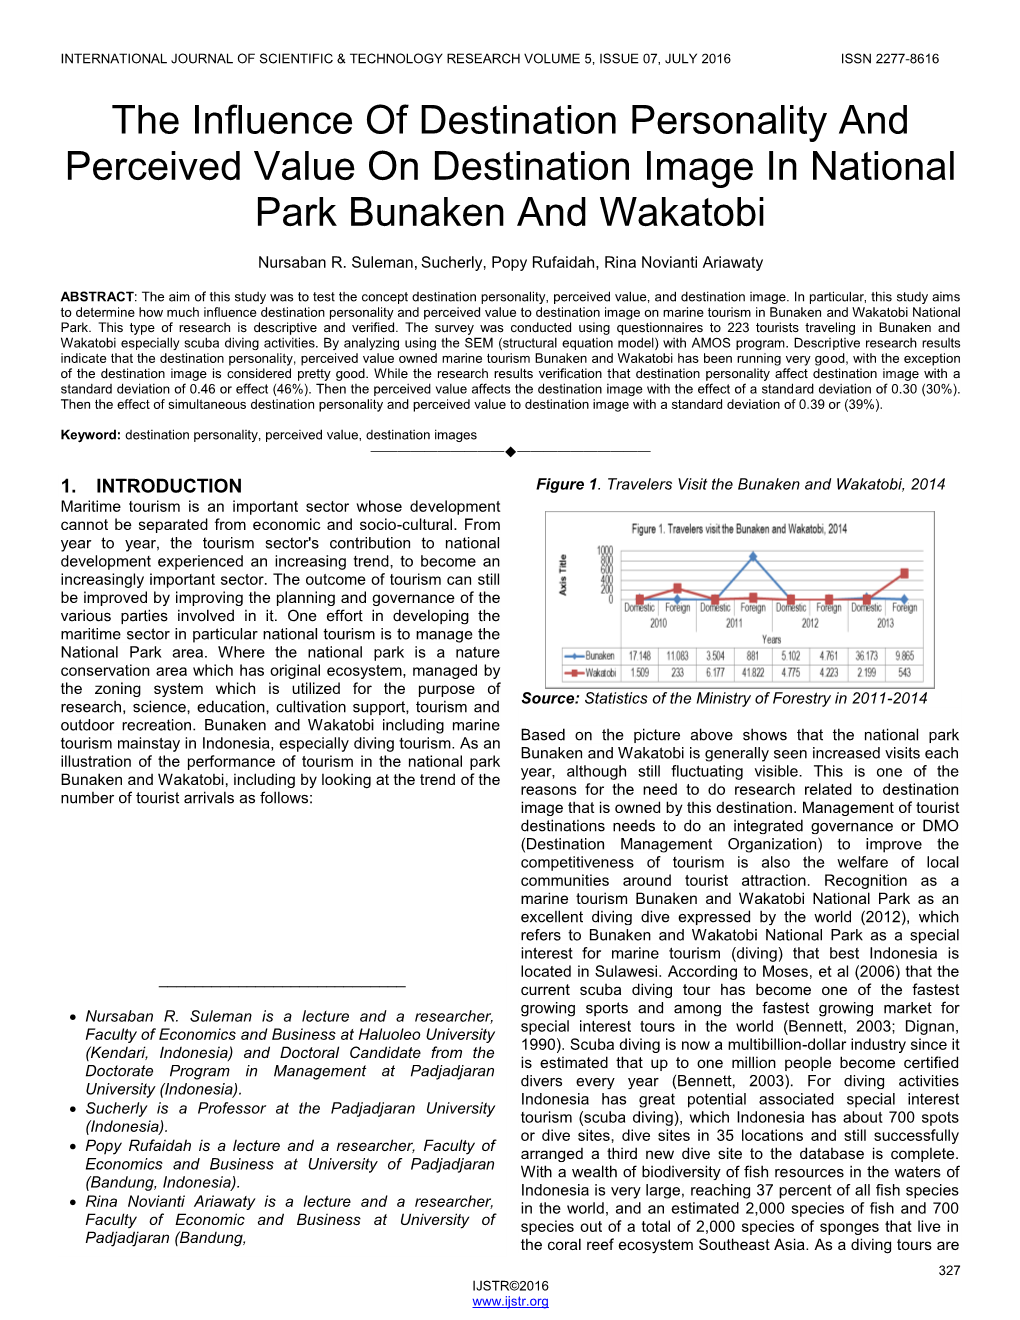 The Influence of Destination Personality and Perceived Value on Destination Image in National Park Bunaken and Wakatobi